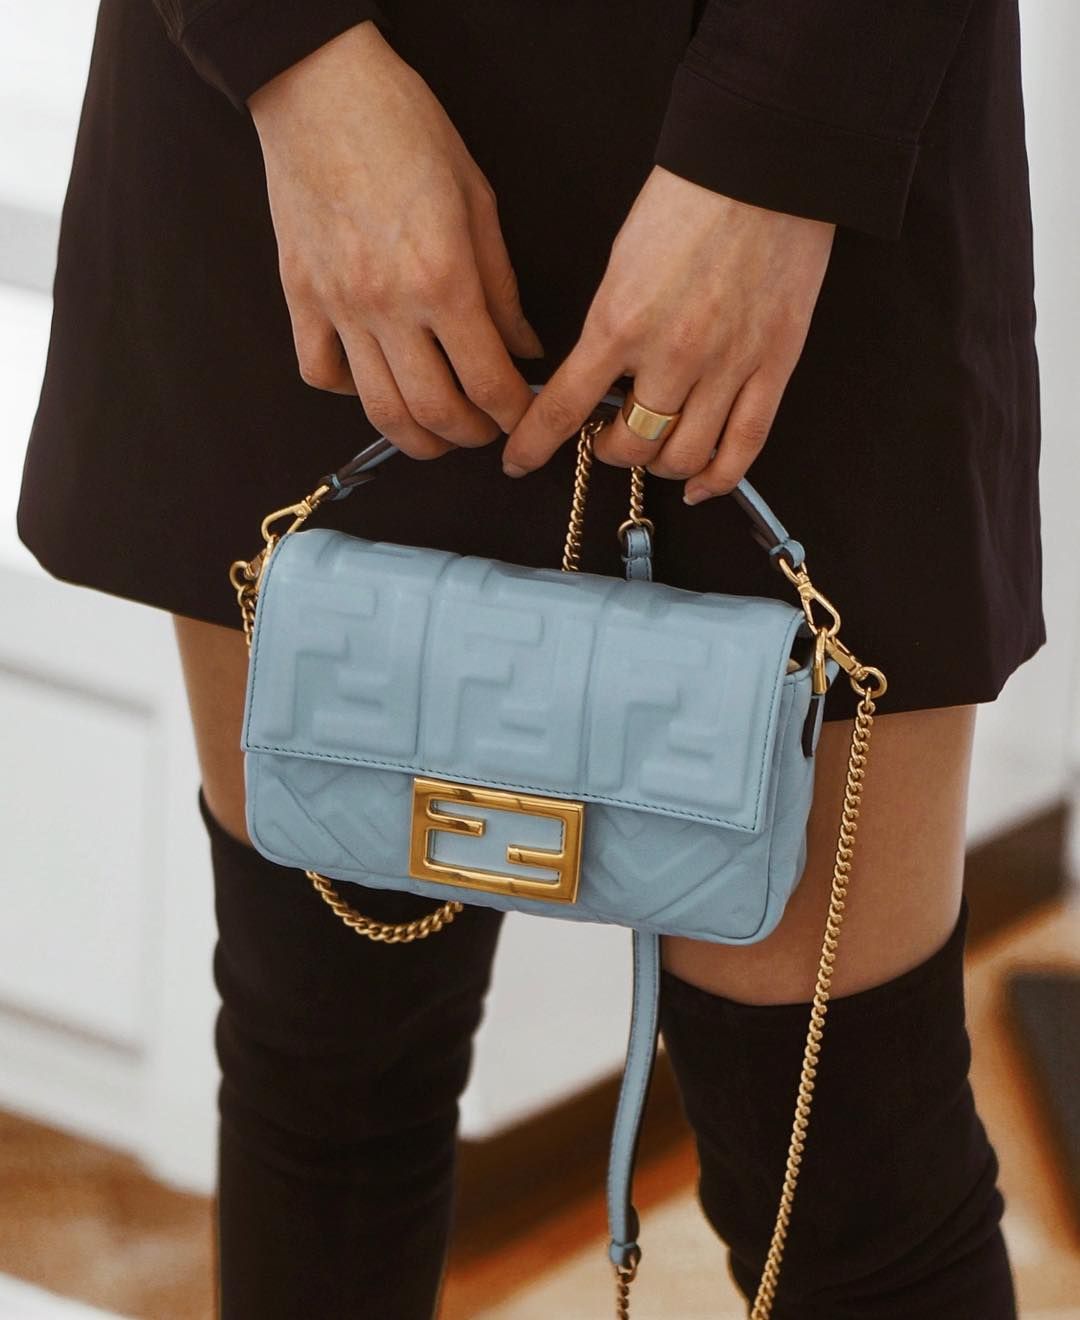 The Fendi Bucket Bag Is Your New BFF If You're a Millenial Or Gen